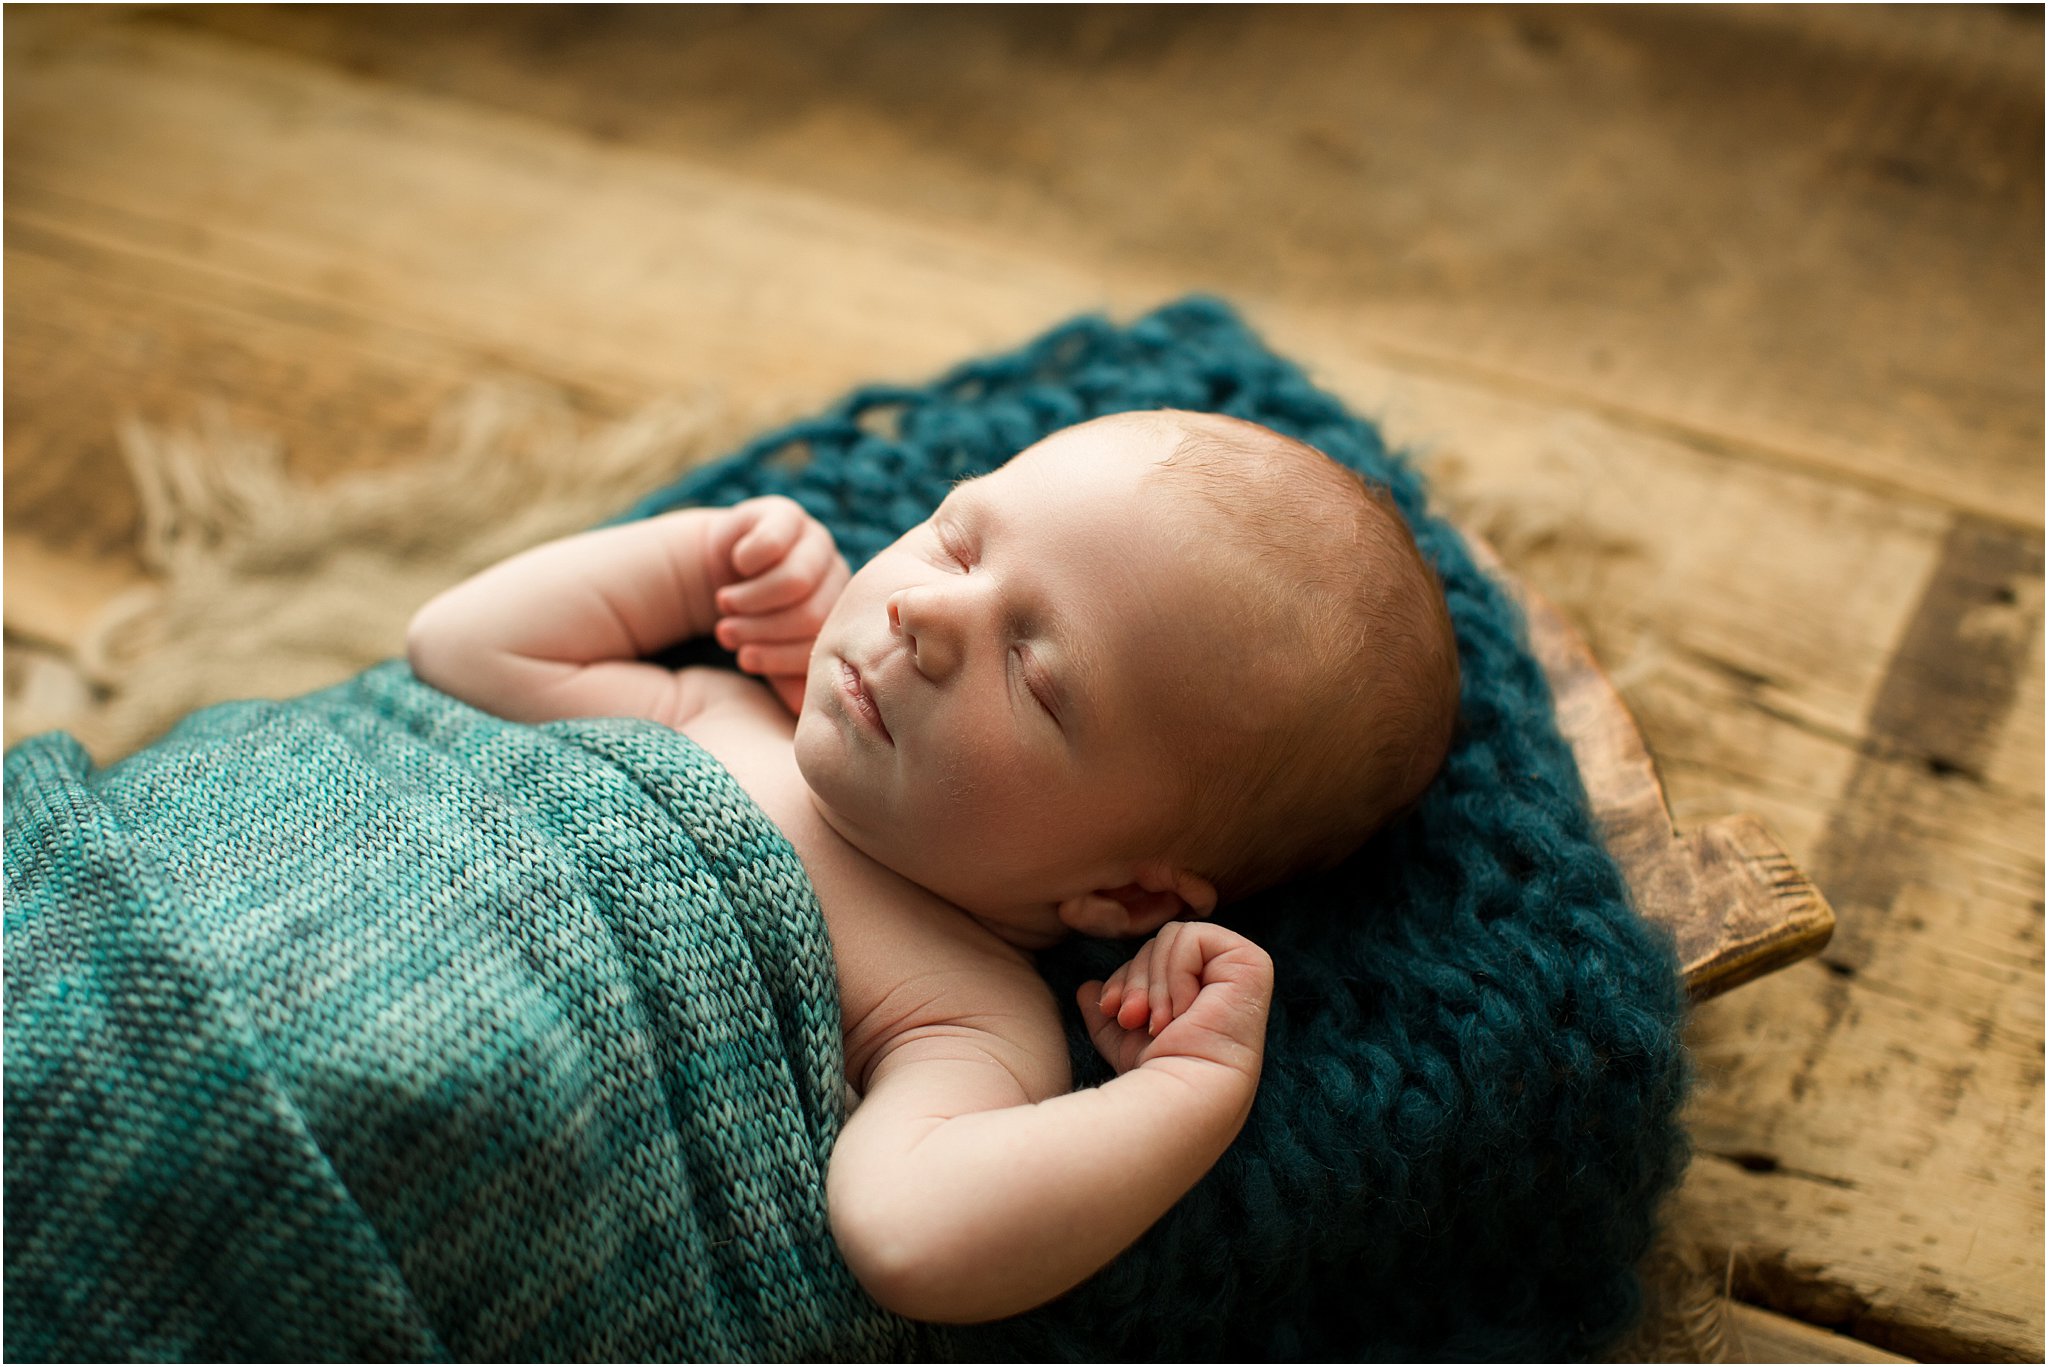 newborn wrapped in teal knits laying in wooden prop on barnwood